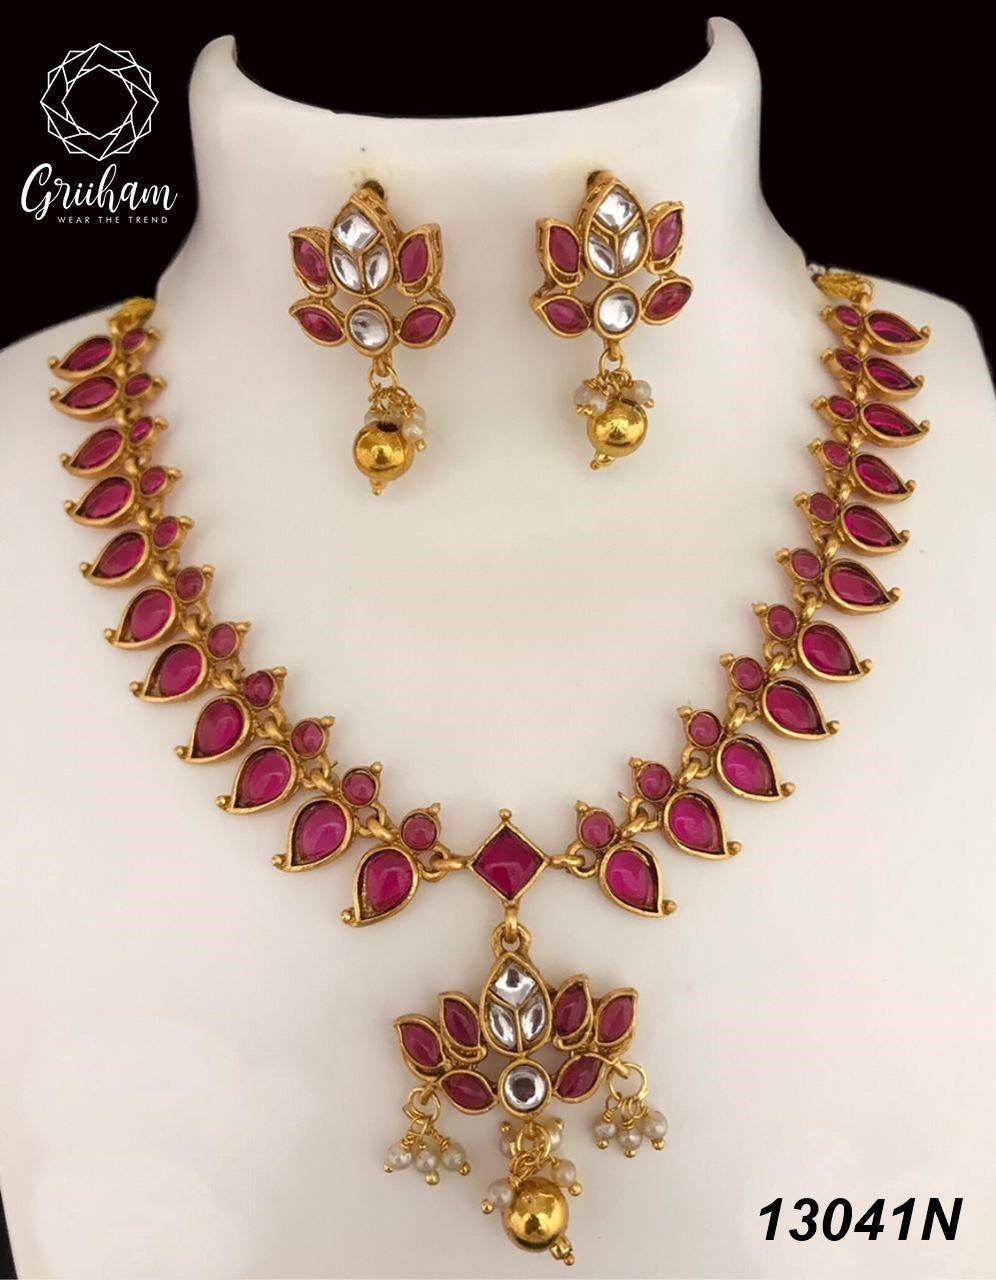 Premium Gold Plated Elegant All occasions Necklace Set 13041N